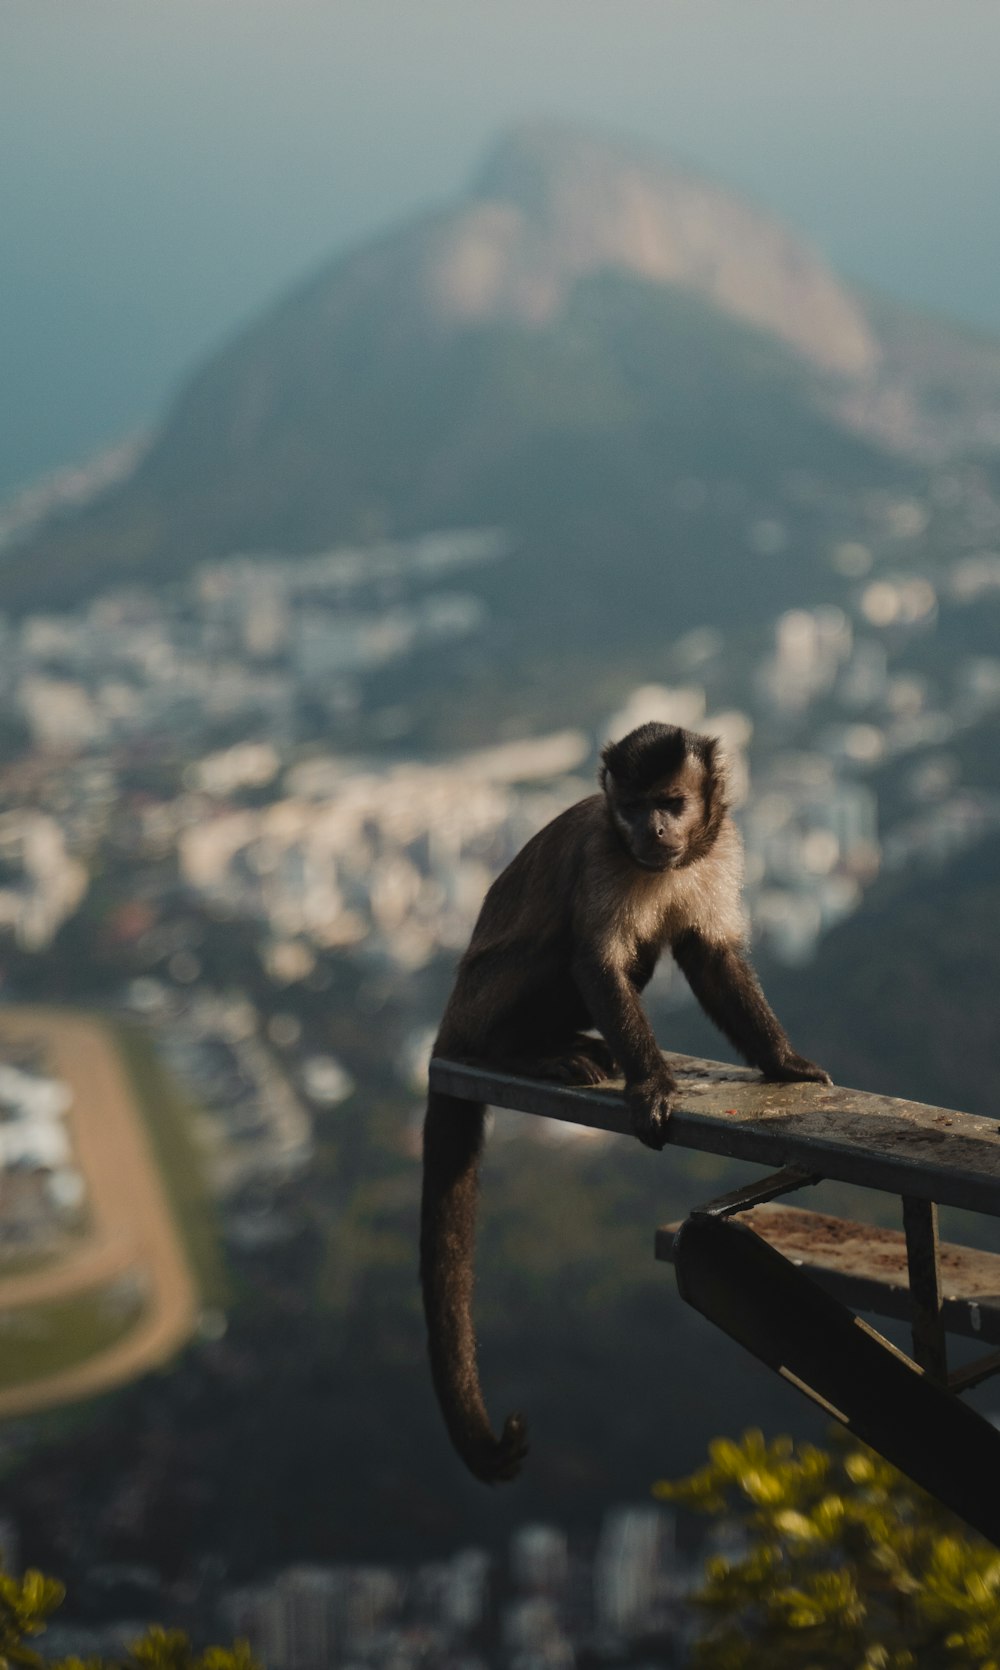 a monkey sitting on top of a wooden rail